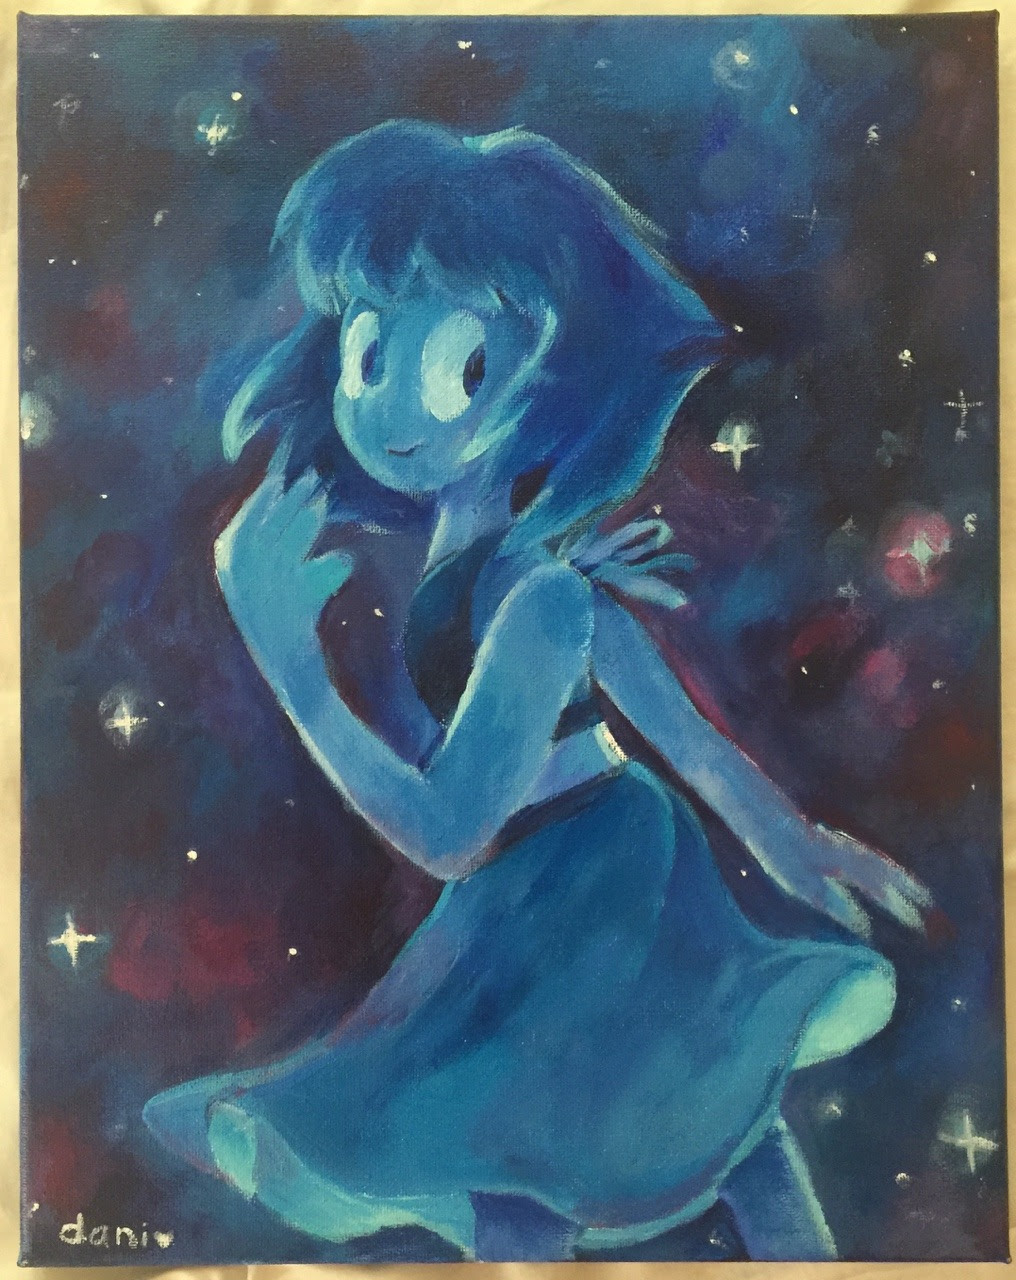 I painted this 2 weeks ago @gummyfang